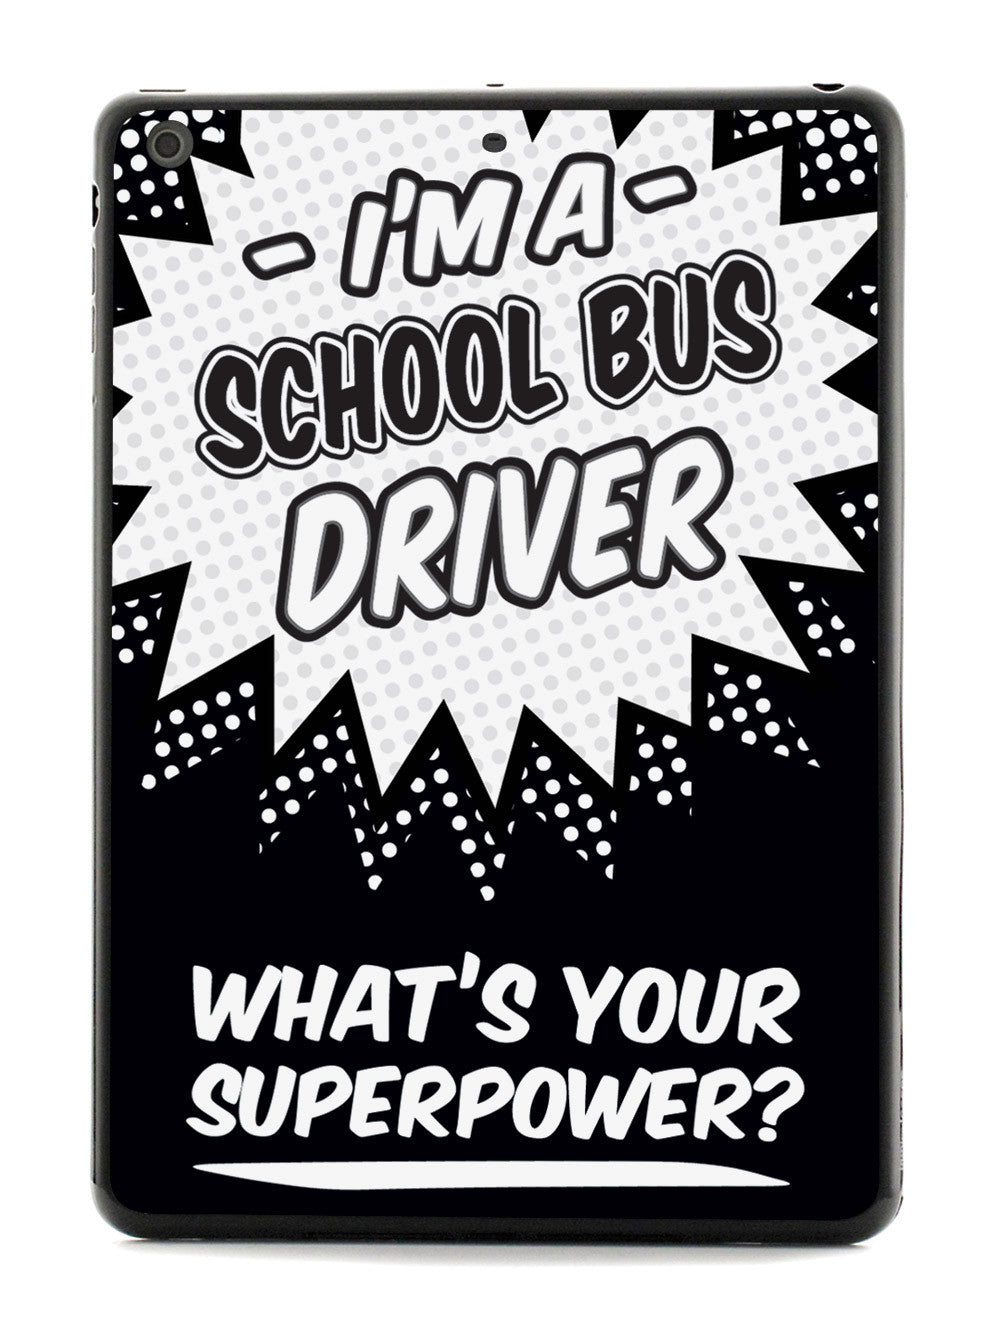 School Bus Driver - What's Your Superpower? Case